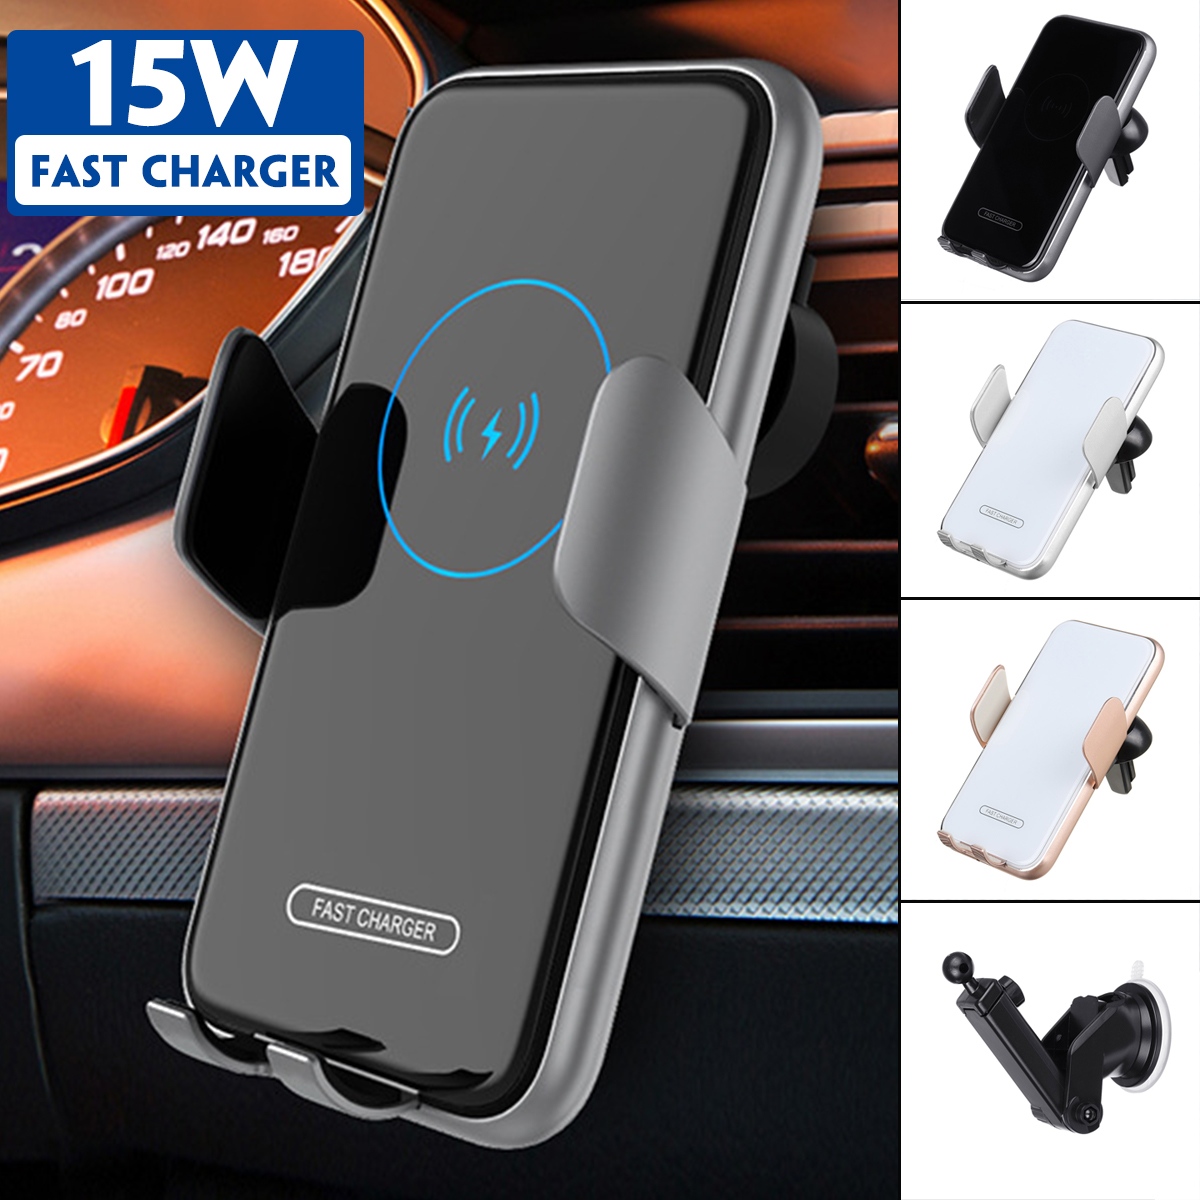 Bakeey-V8-15W-Wireless-Car-Charger-Intelligent-Sensing-Automatic-Clamping-Fast-Charging-For-iPhone-1-1750013-1